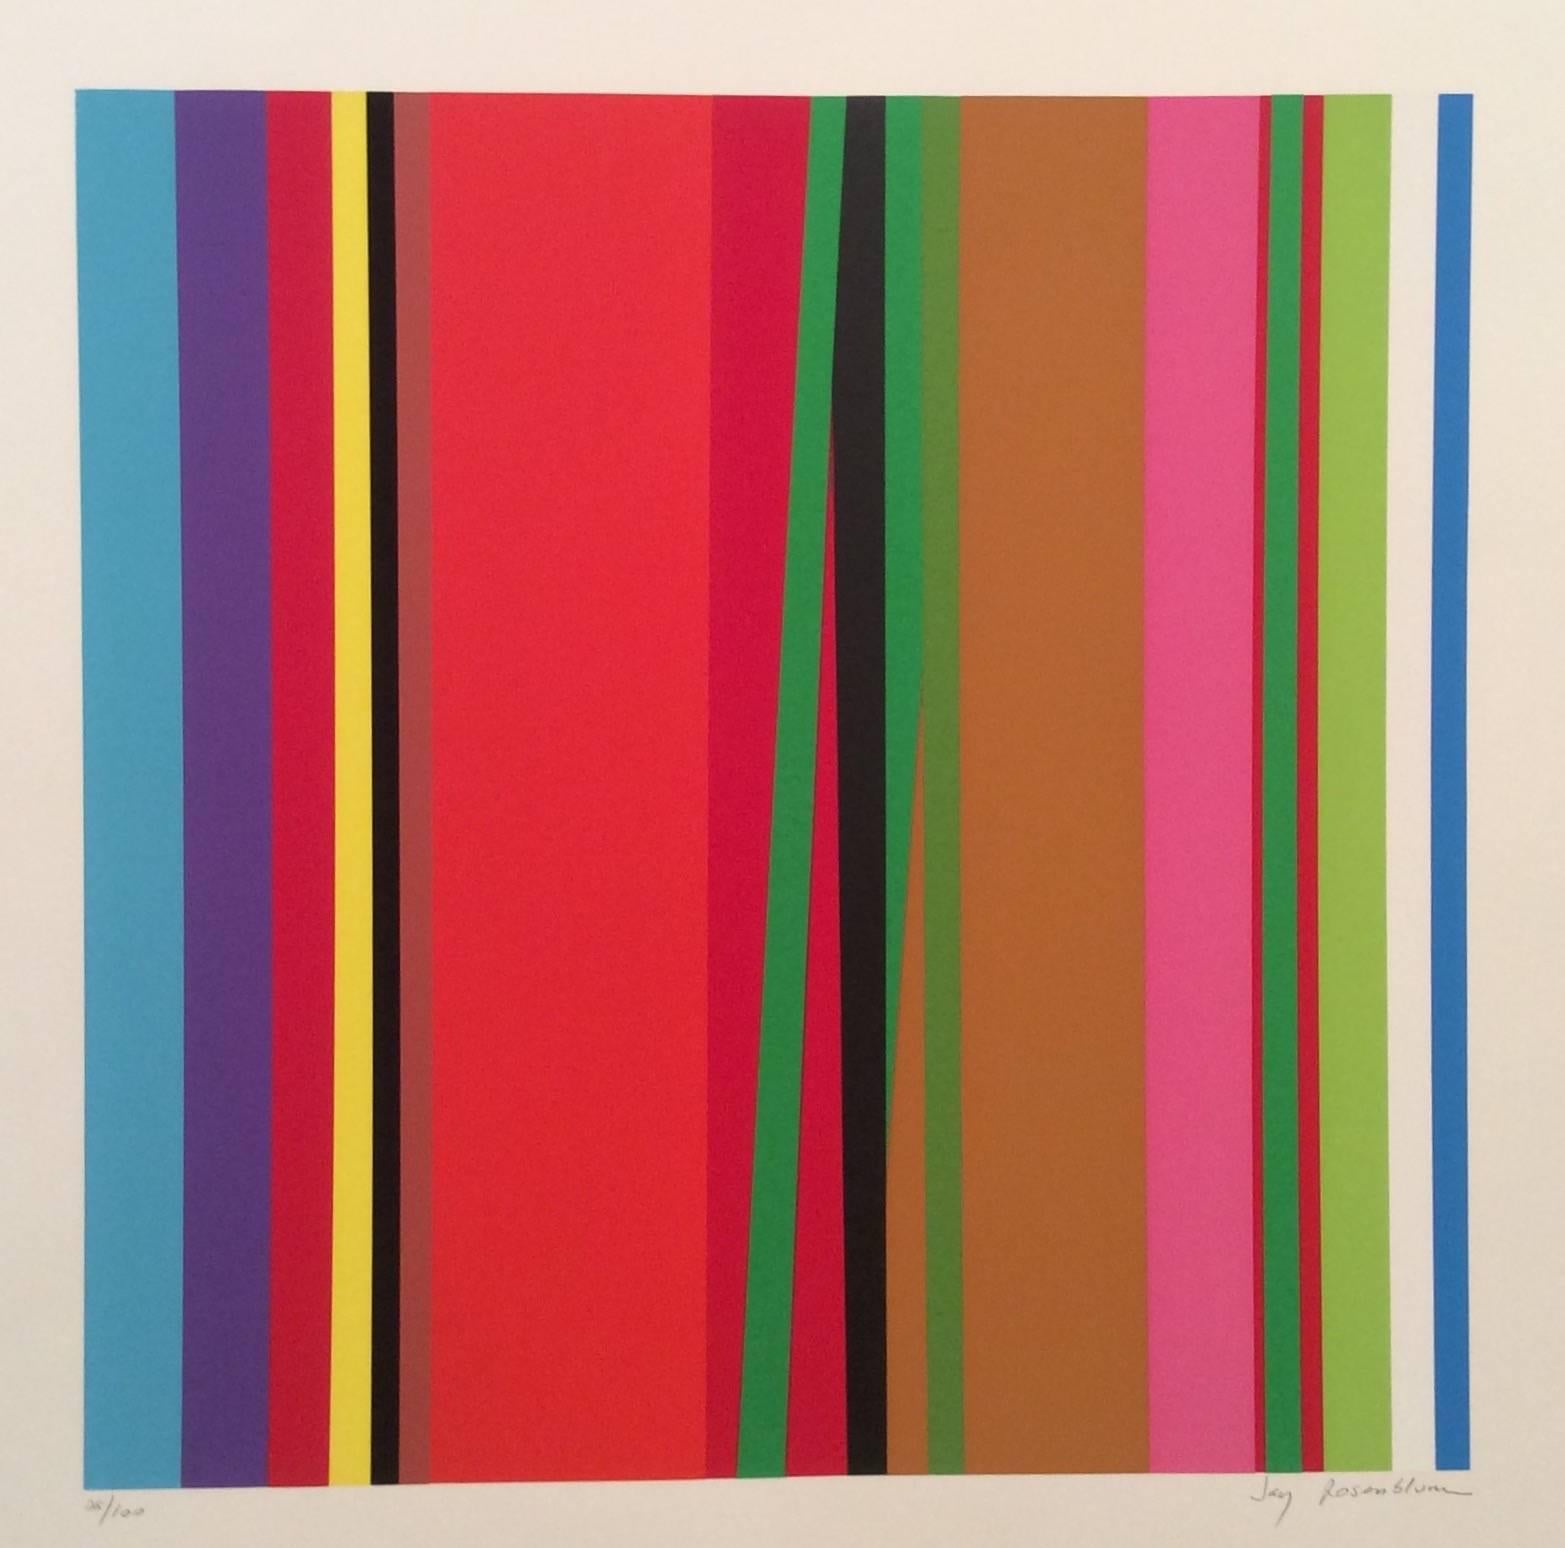 Serigraph signed and numbered by American artist Jay Rosenblum (1933-1989). From a series of 100. Rosenblum was a noted American Color Field and Abstract Expressionist artist. We have other Rosenblum’s in our inventory on 1stdibs.